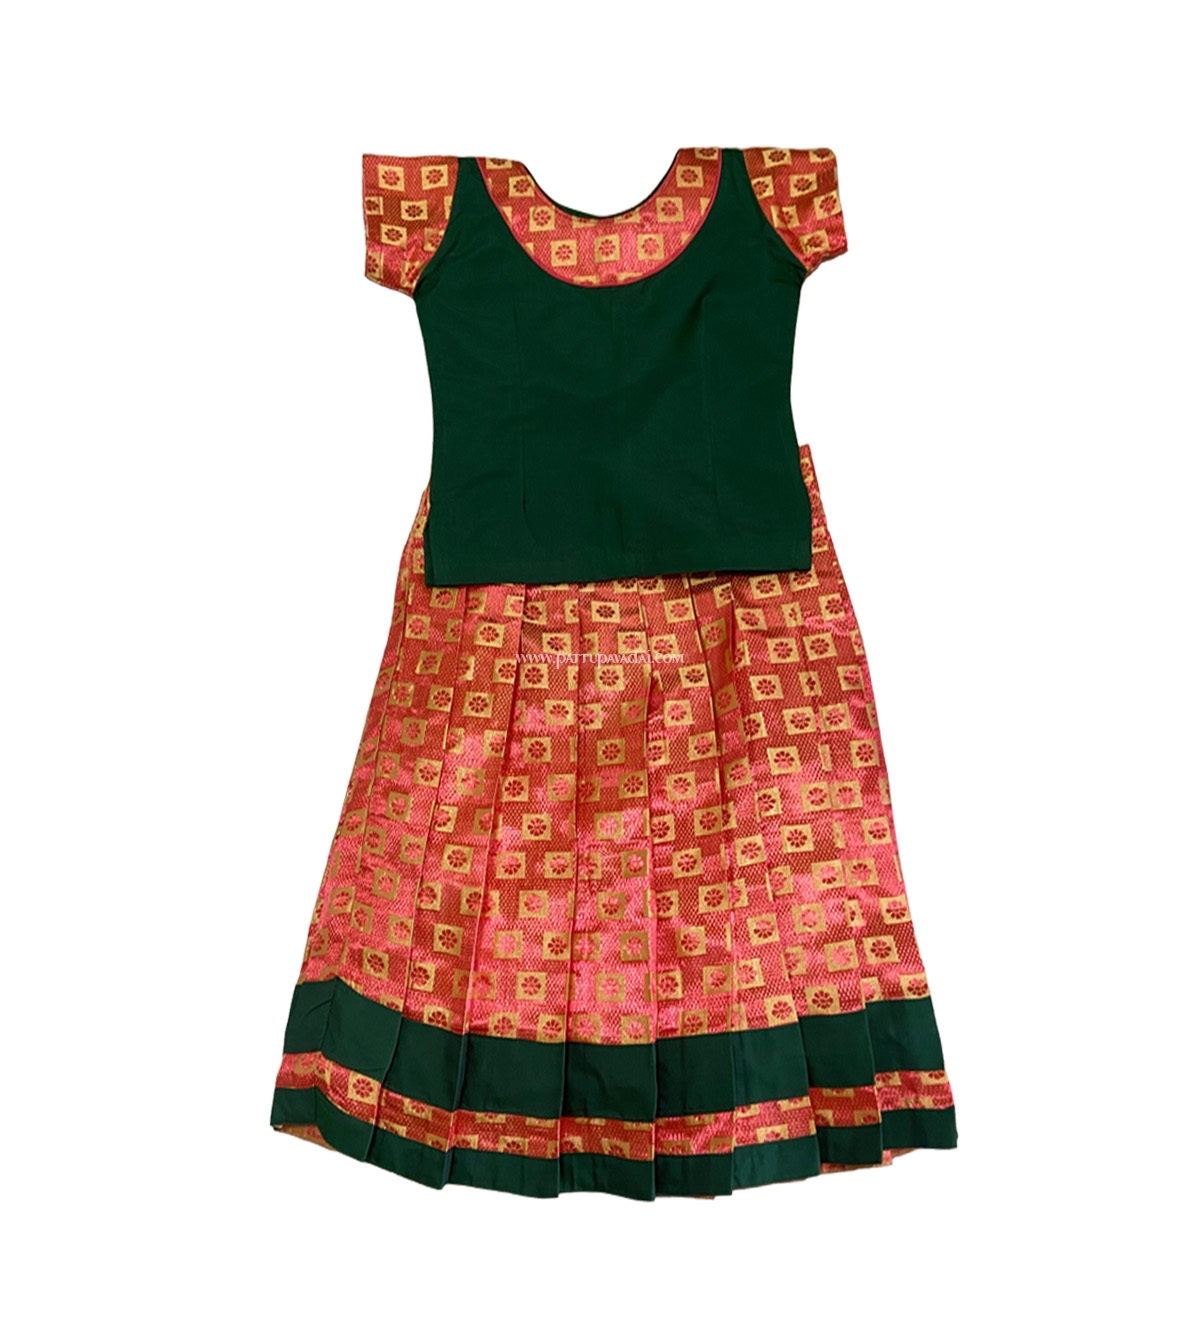 South Indian Traditional Brocade Pavadai Green and Orange